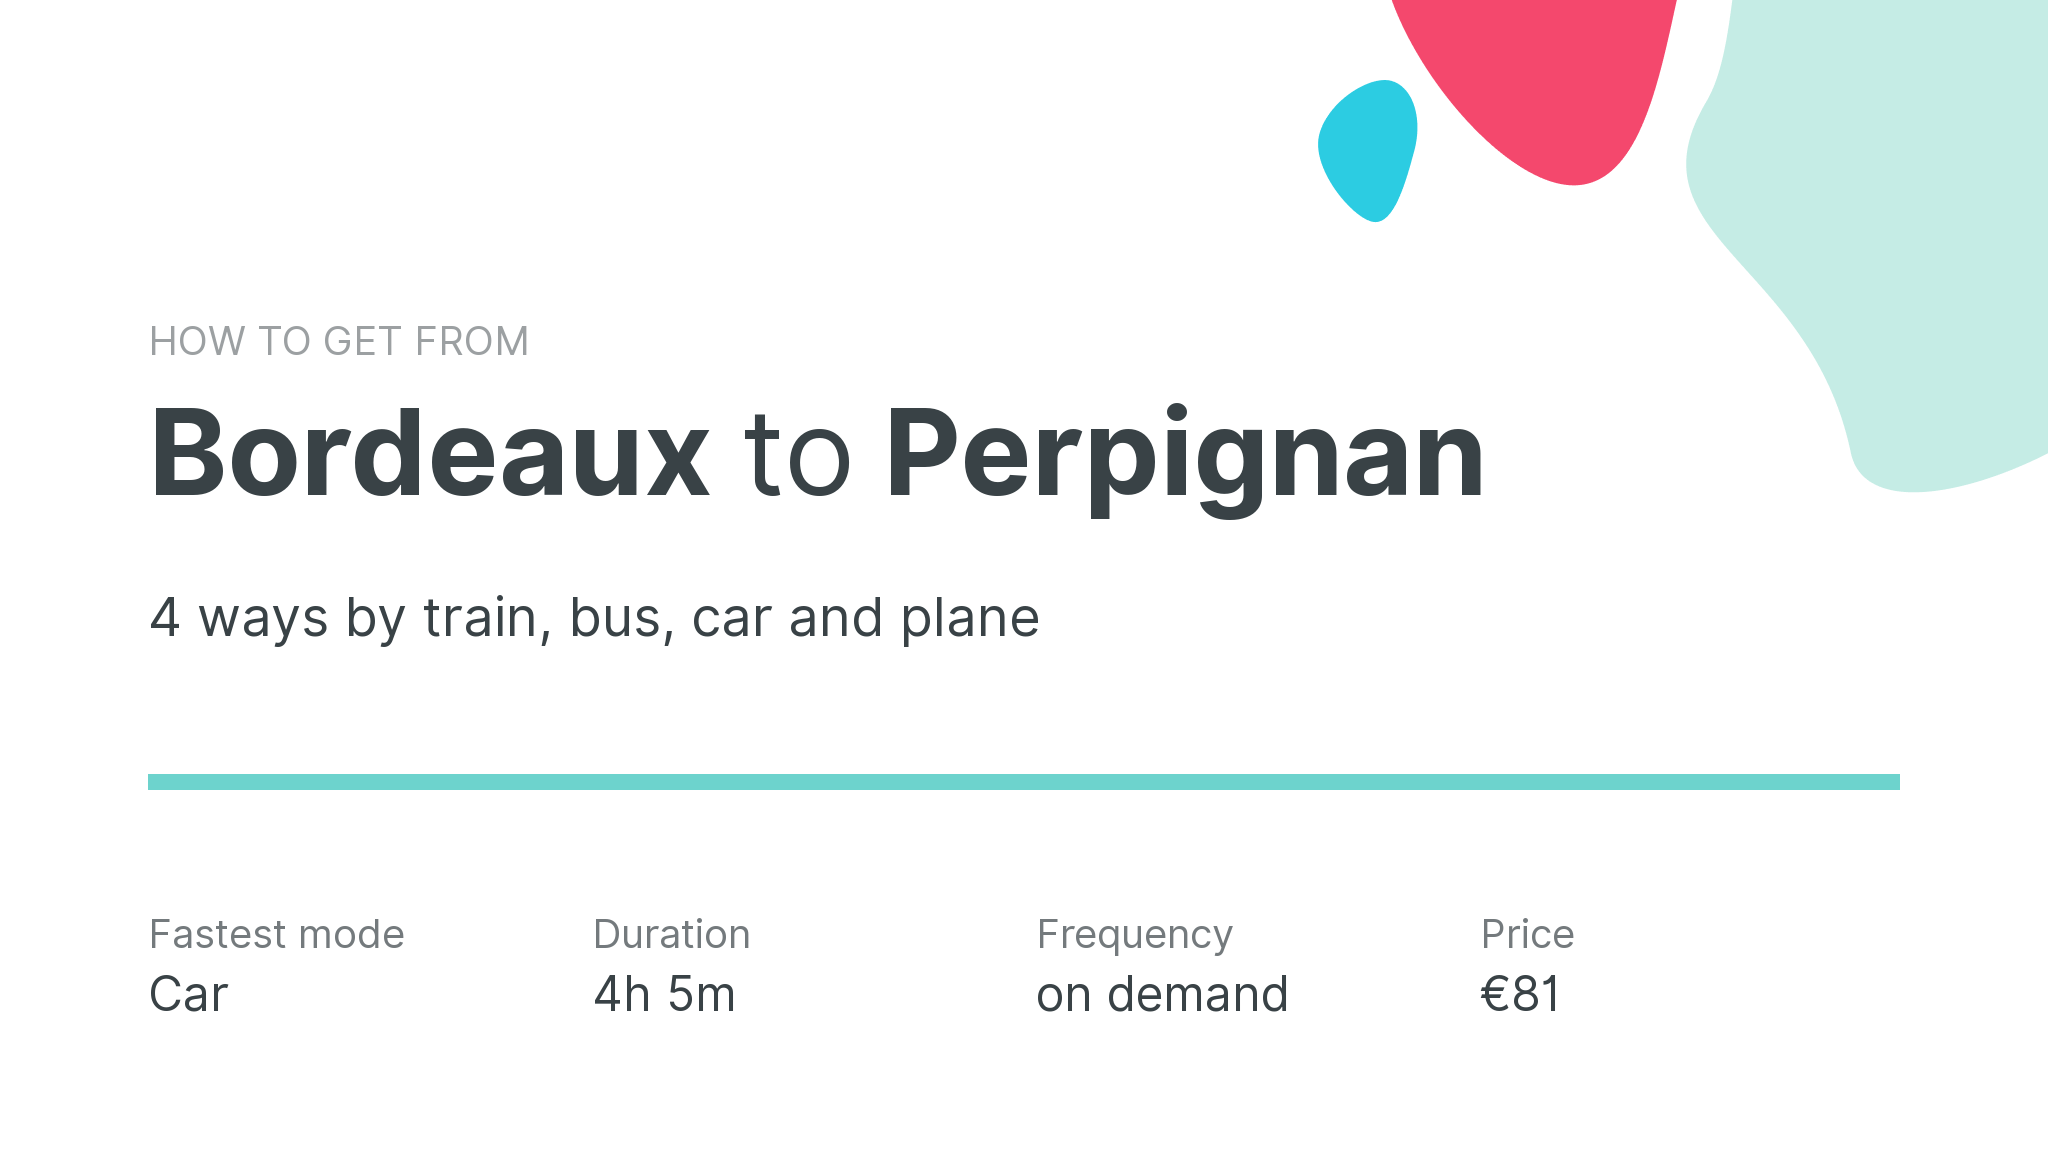 How do I get from Bordeaux to Perpignan